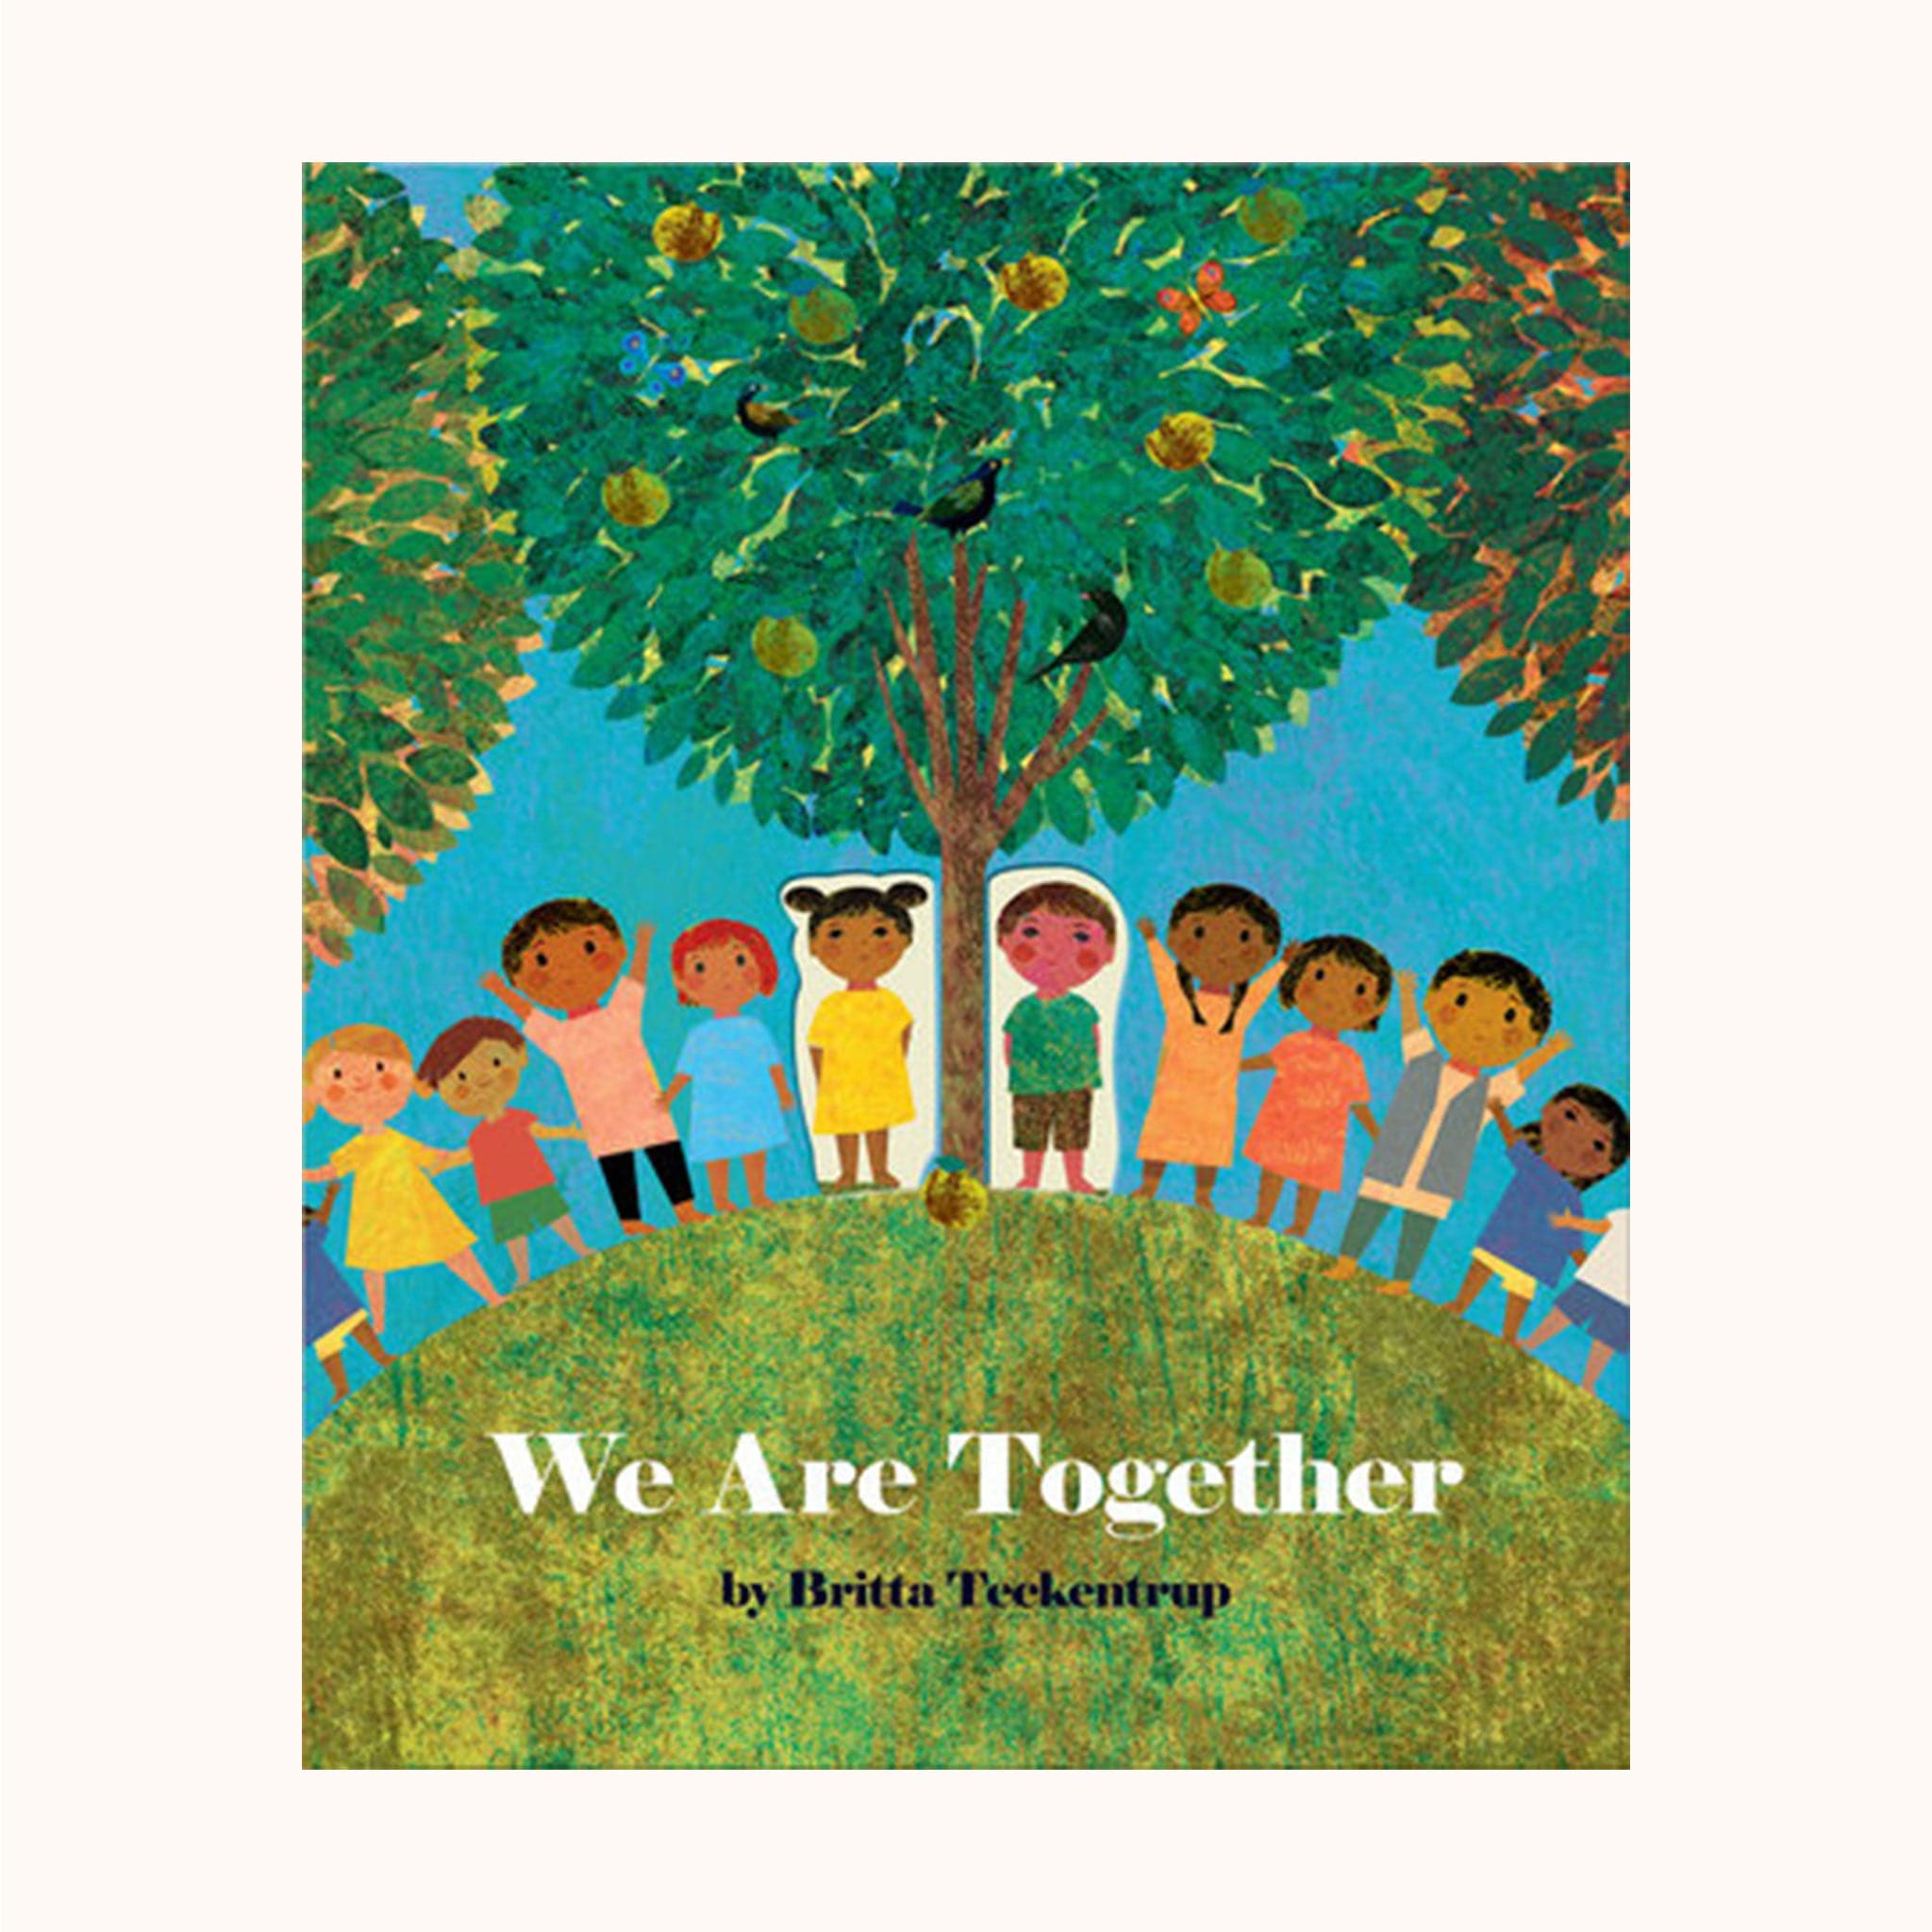 This children&#39;s picture book cover features a row of lively children standing side by side below three towering trees. The tree in the middle is in focus and the other two peak into the frame. The title reads &#39;We Are Together&#39; in white text over the textured green, round hill the children stand on. 